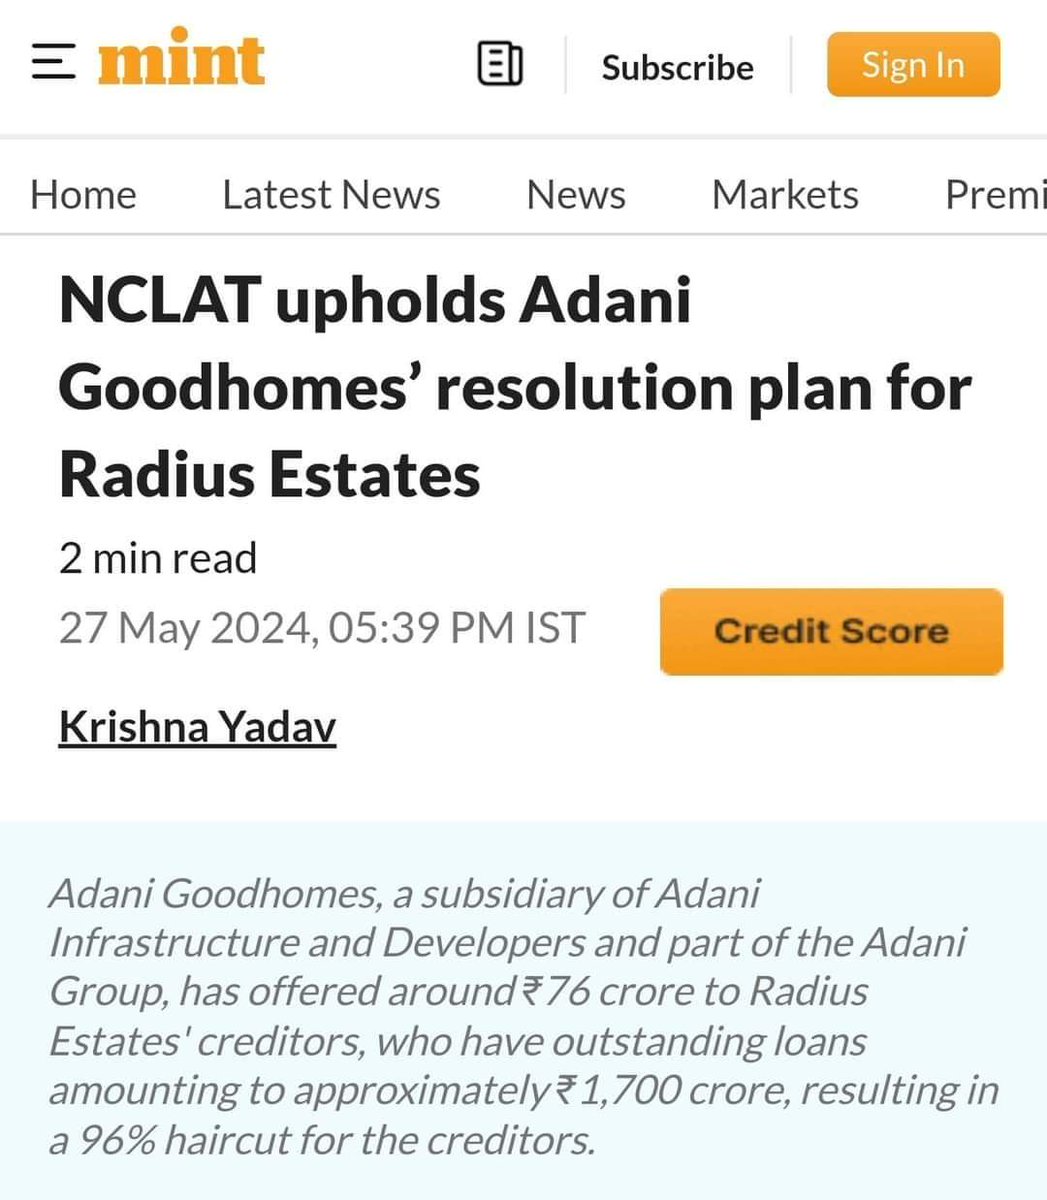 ANOTHER EXAMPLE OF CRONY LOOT

Adani Goodhomes is buying real estate company Radius Estates for ₹76 crores. Company has outstanding loans of approximately ₹1,700 crore. A 96% loan write-off has been approved overruling banks' objection.

Modani Ease Of Doing Business!